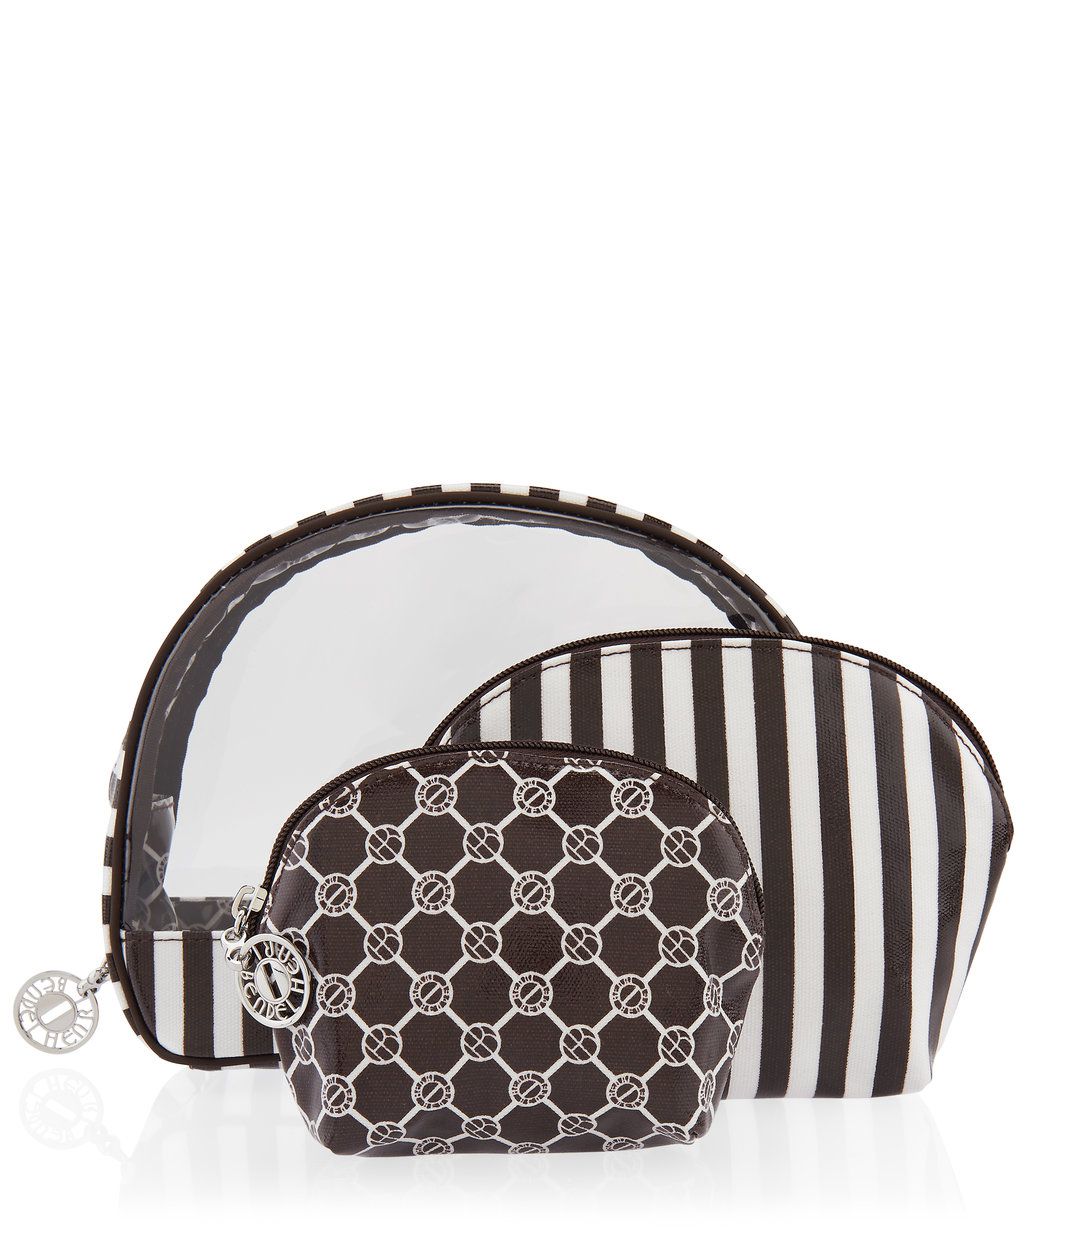 Shopping: 12 Cute and Practical Travel Accessories to Shop from Henri Bendel